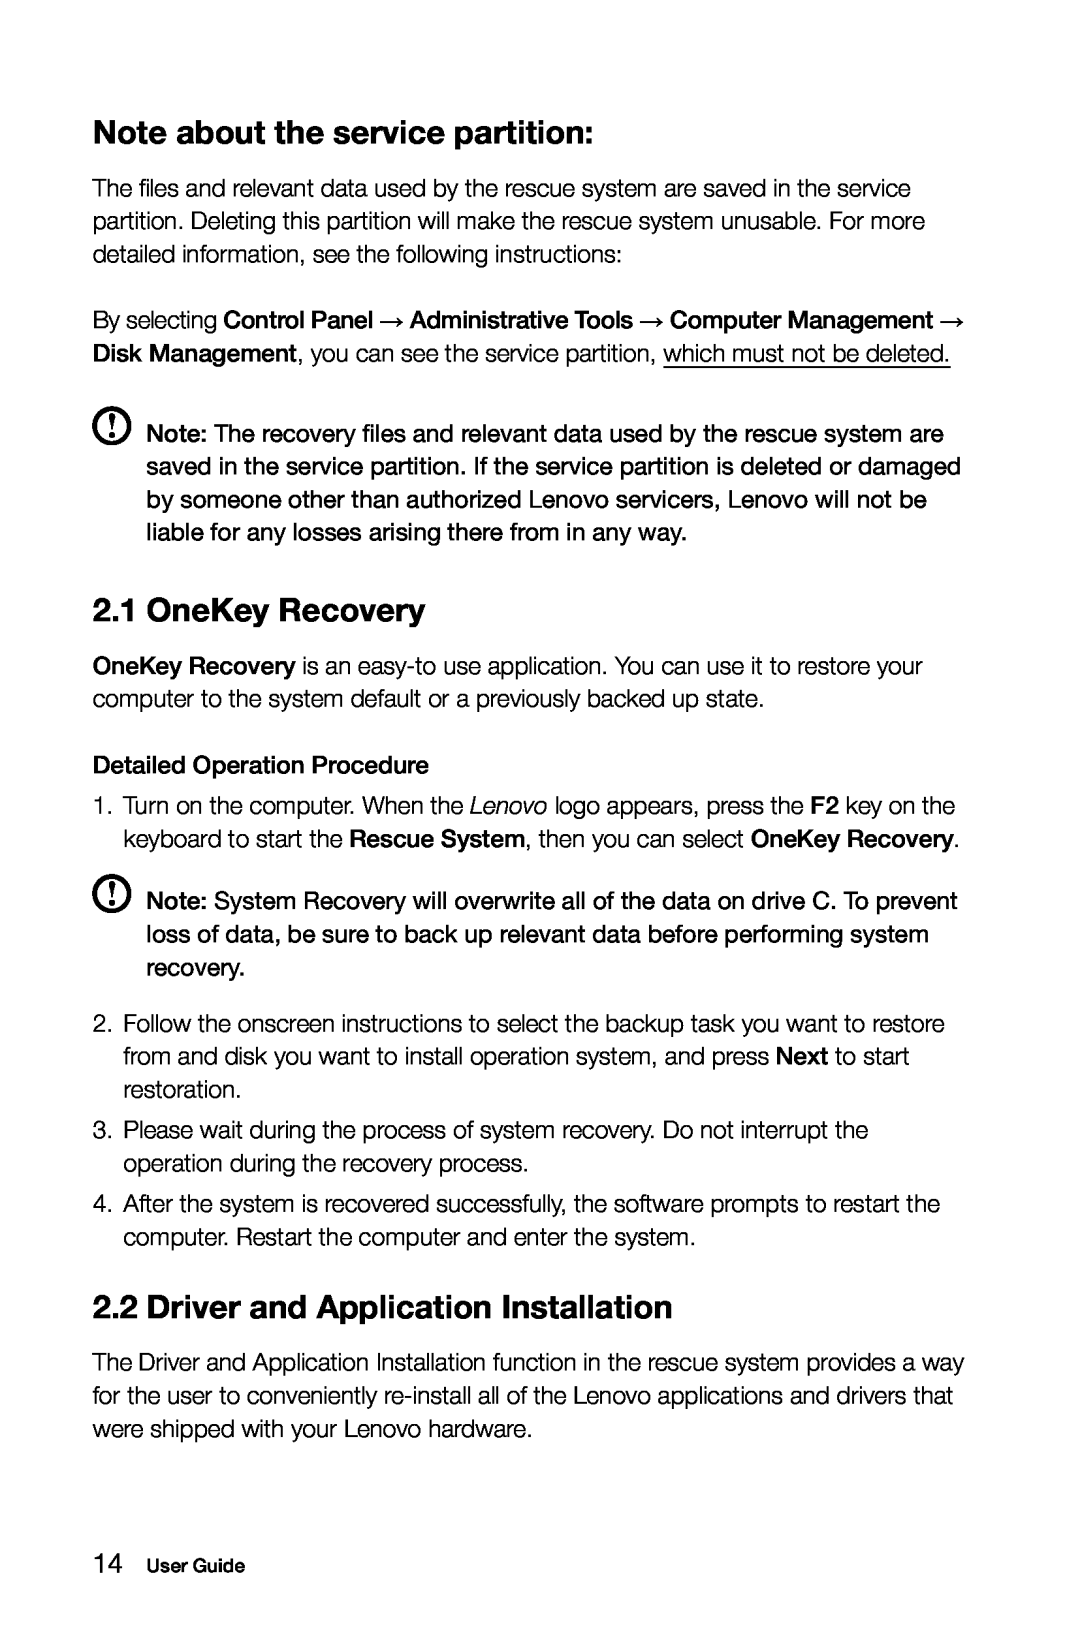 Lenovo 10041-10049 manual Note about the service partition, OneKey Recovery, Driver and Application Installation 